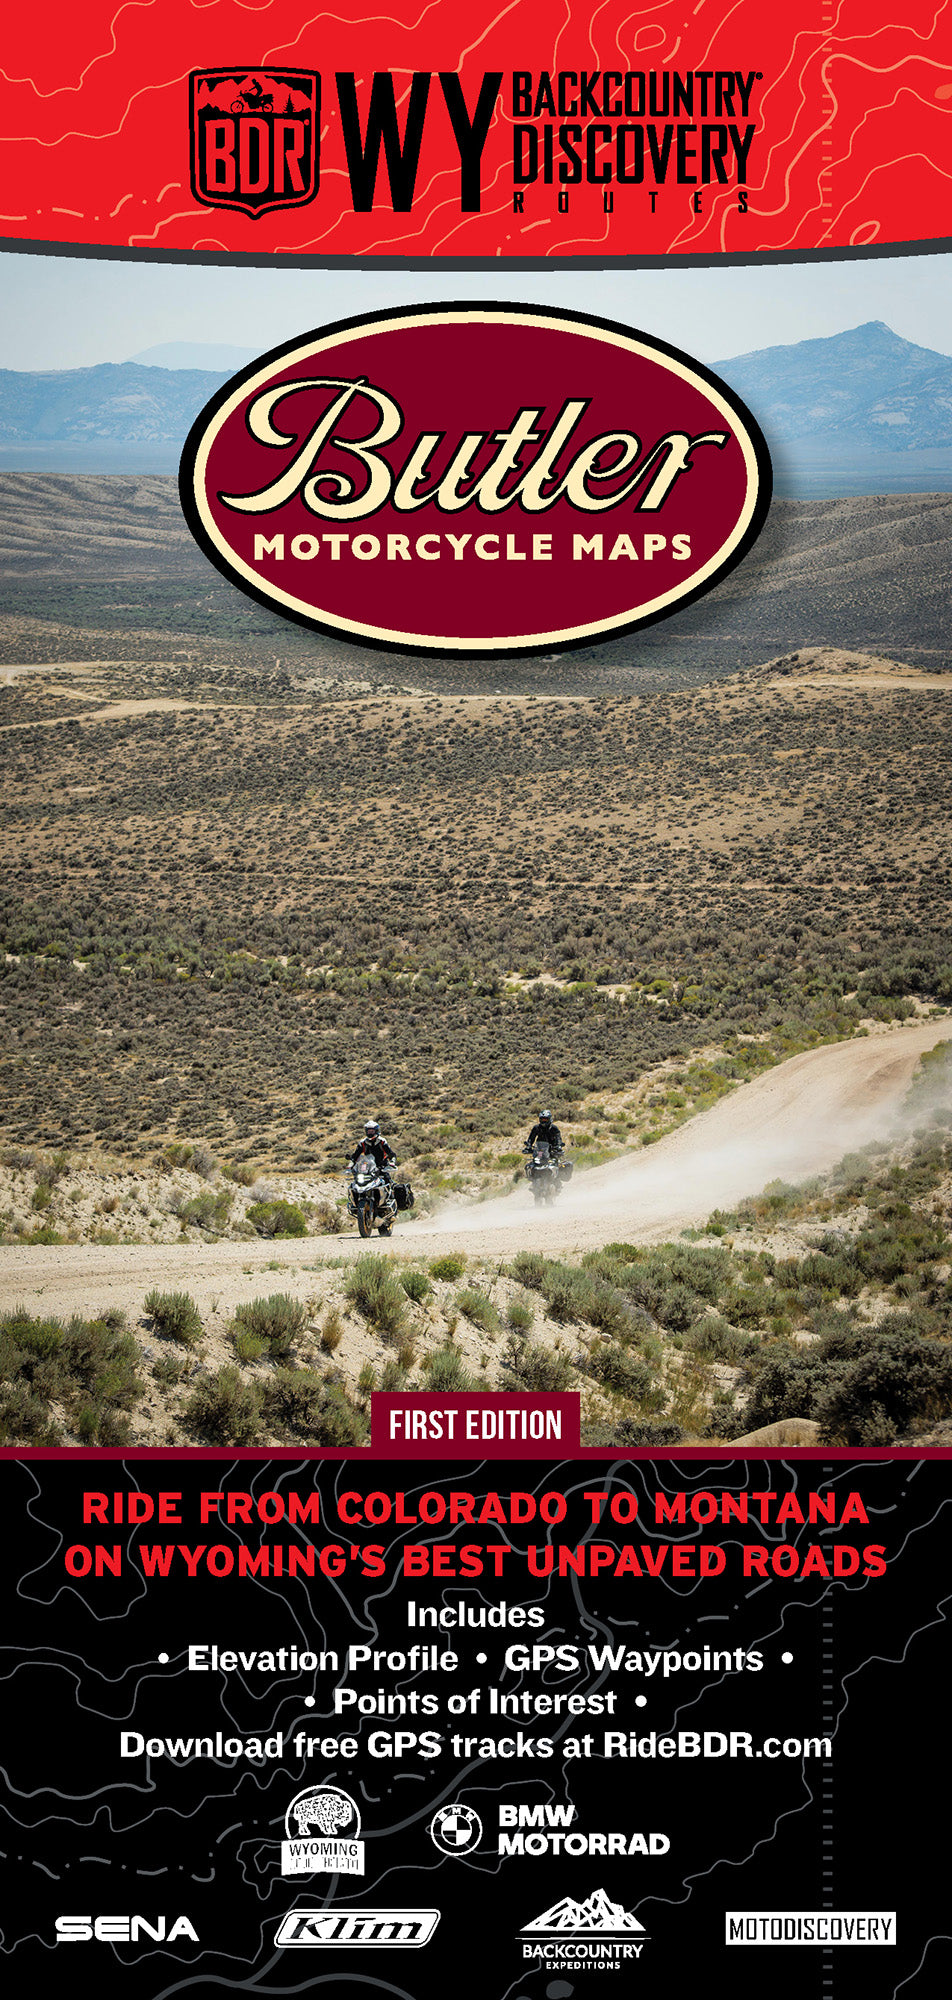 Wyoming Backcountry Discovery Route (WYBDR) 2nd Edition